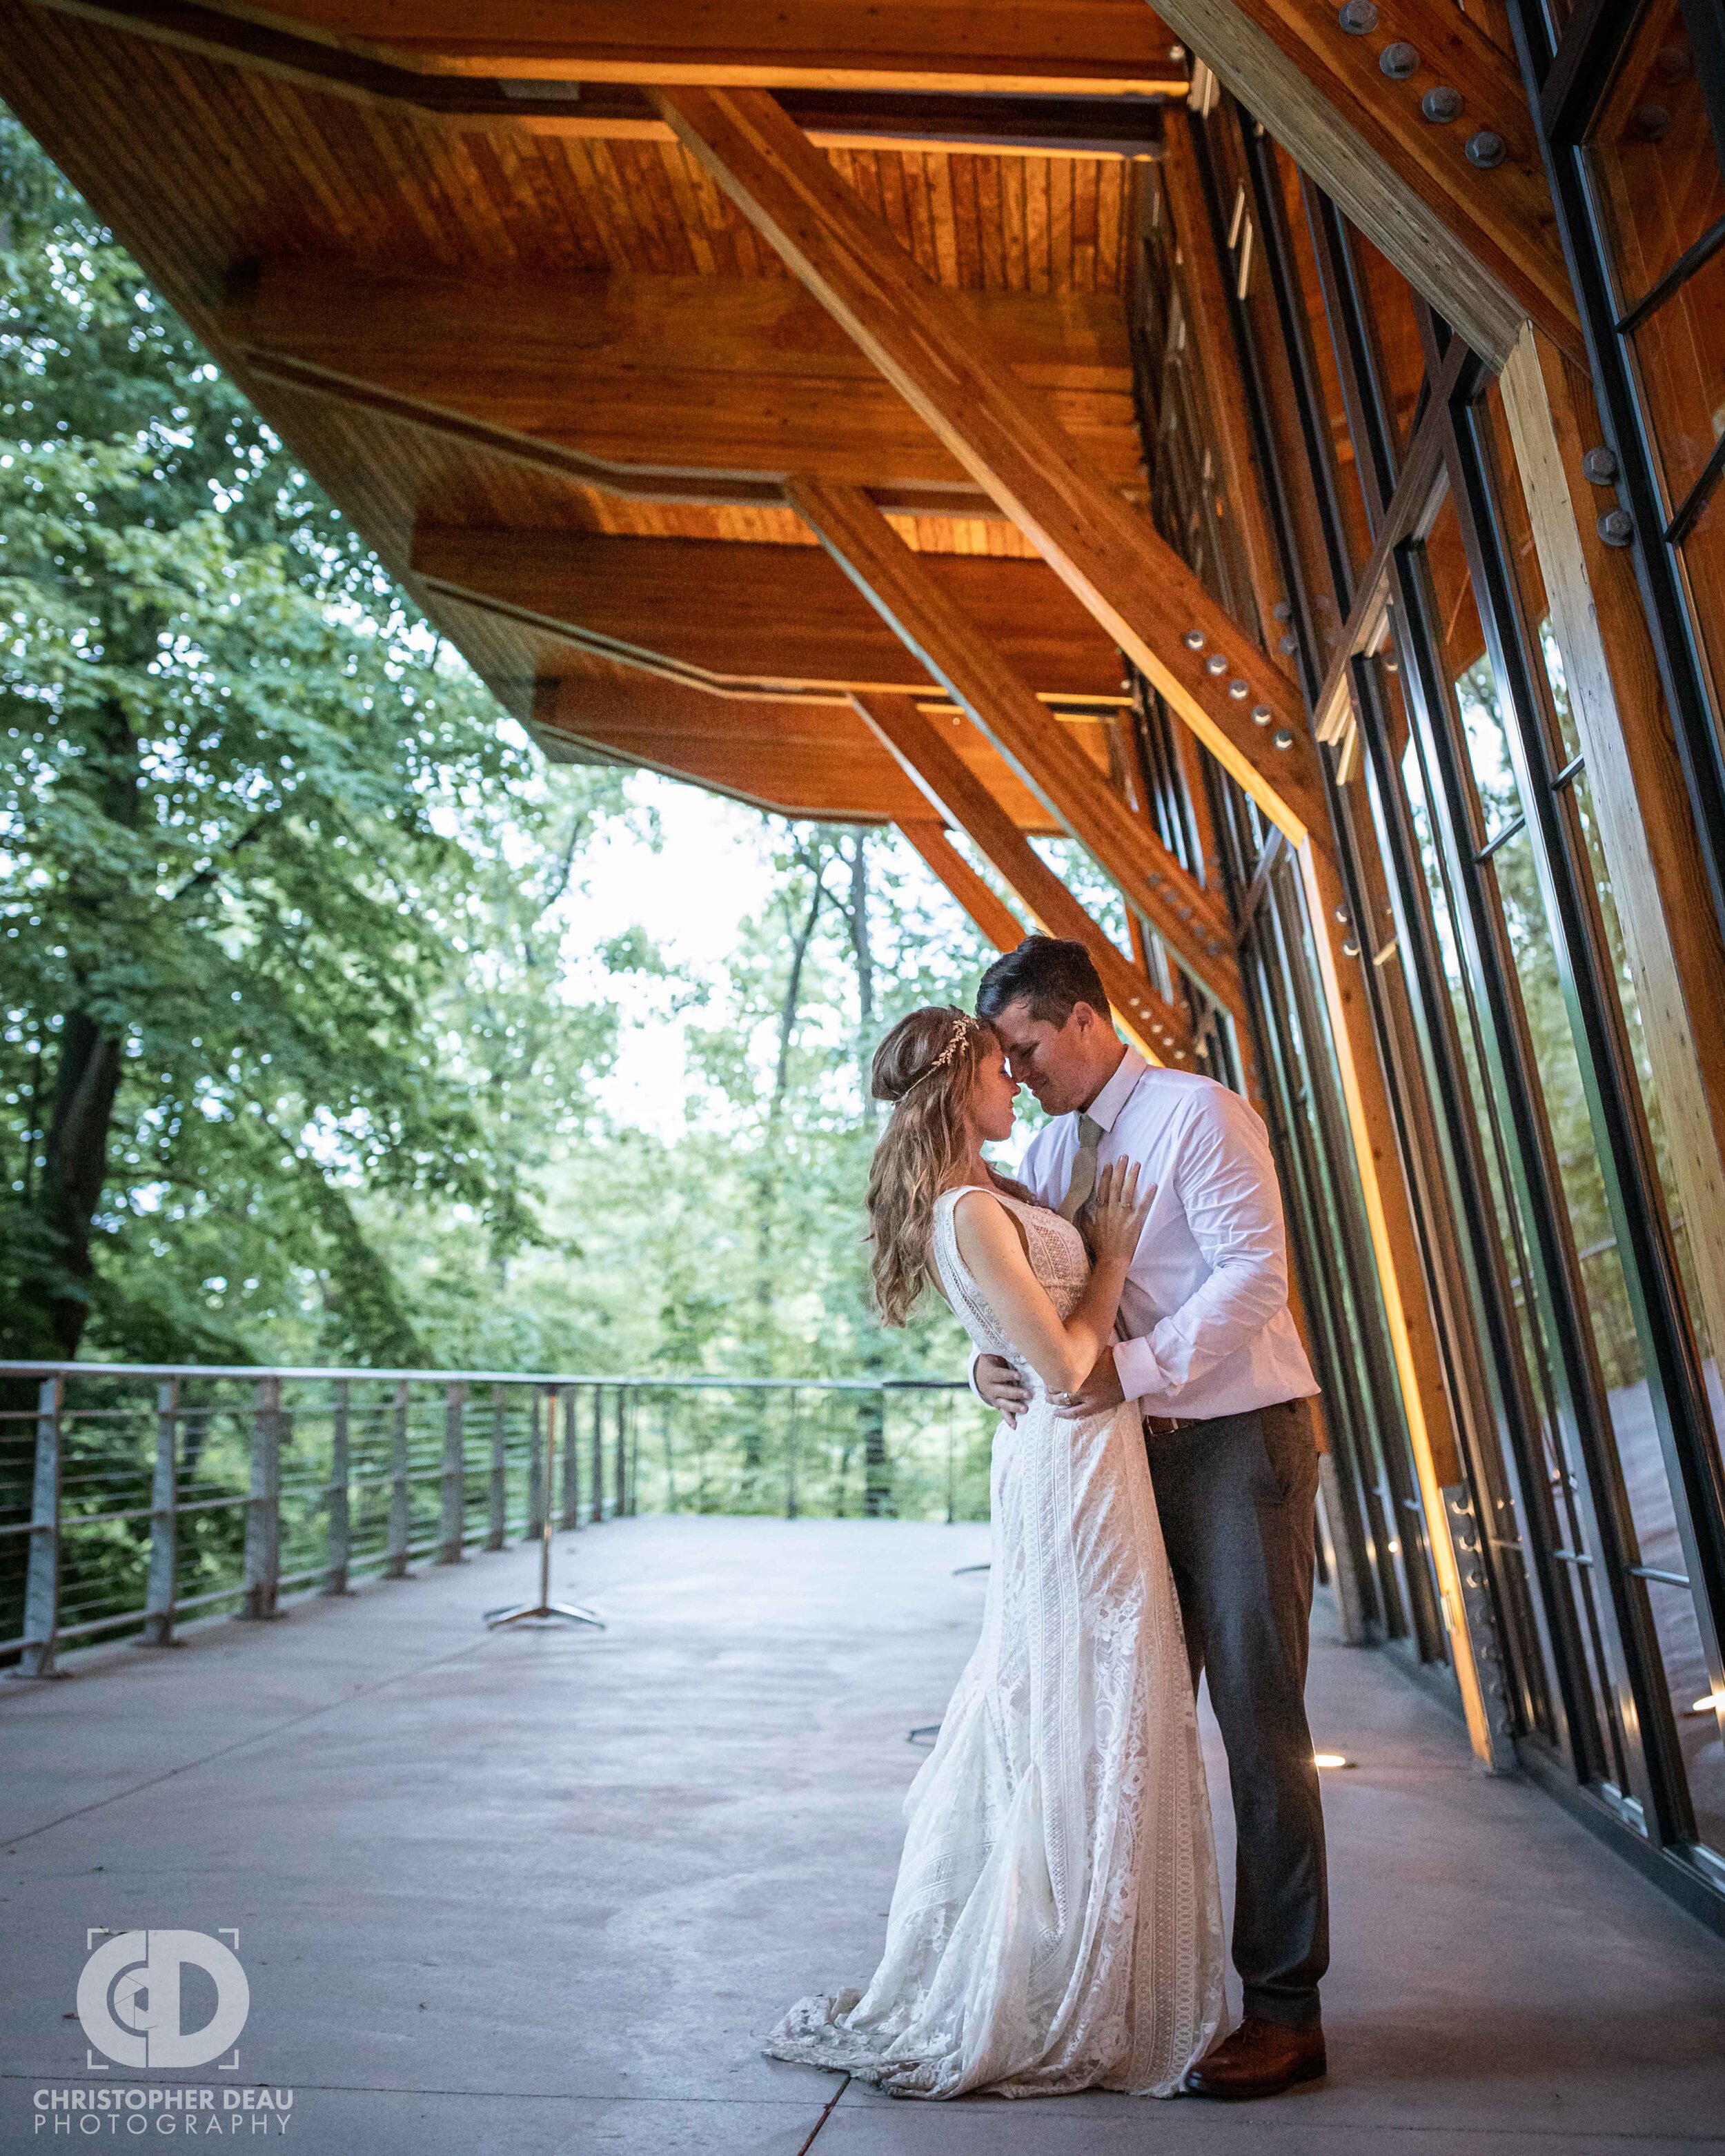  Bride and Groom during their wedding reception at the Bissell Tree House 